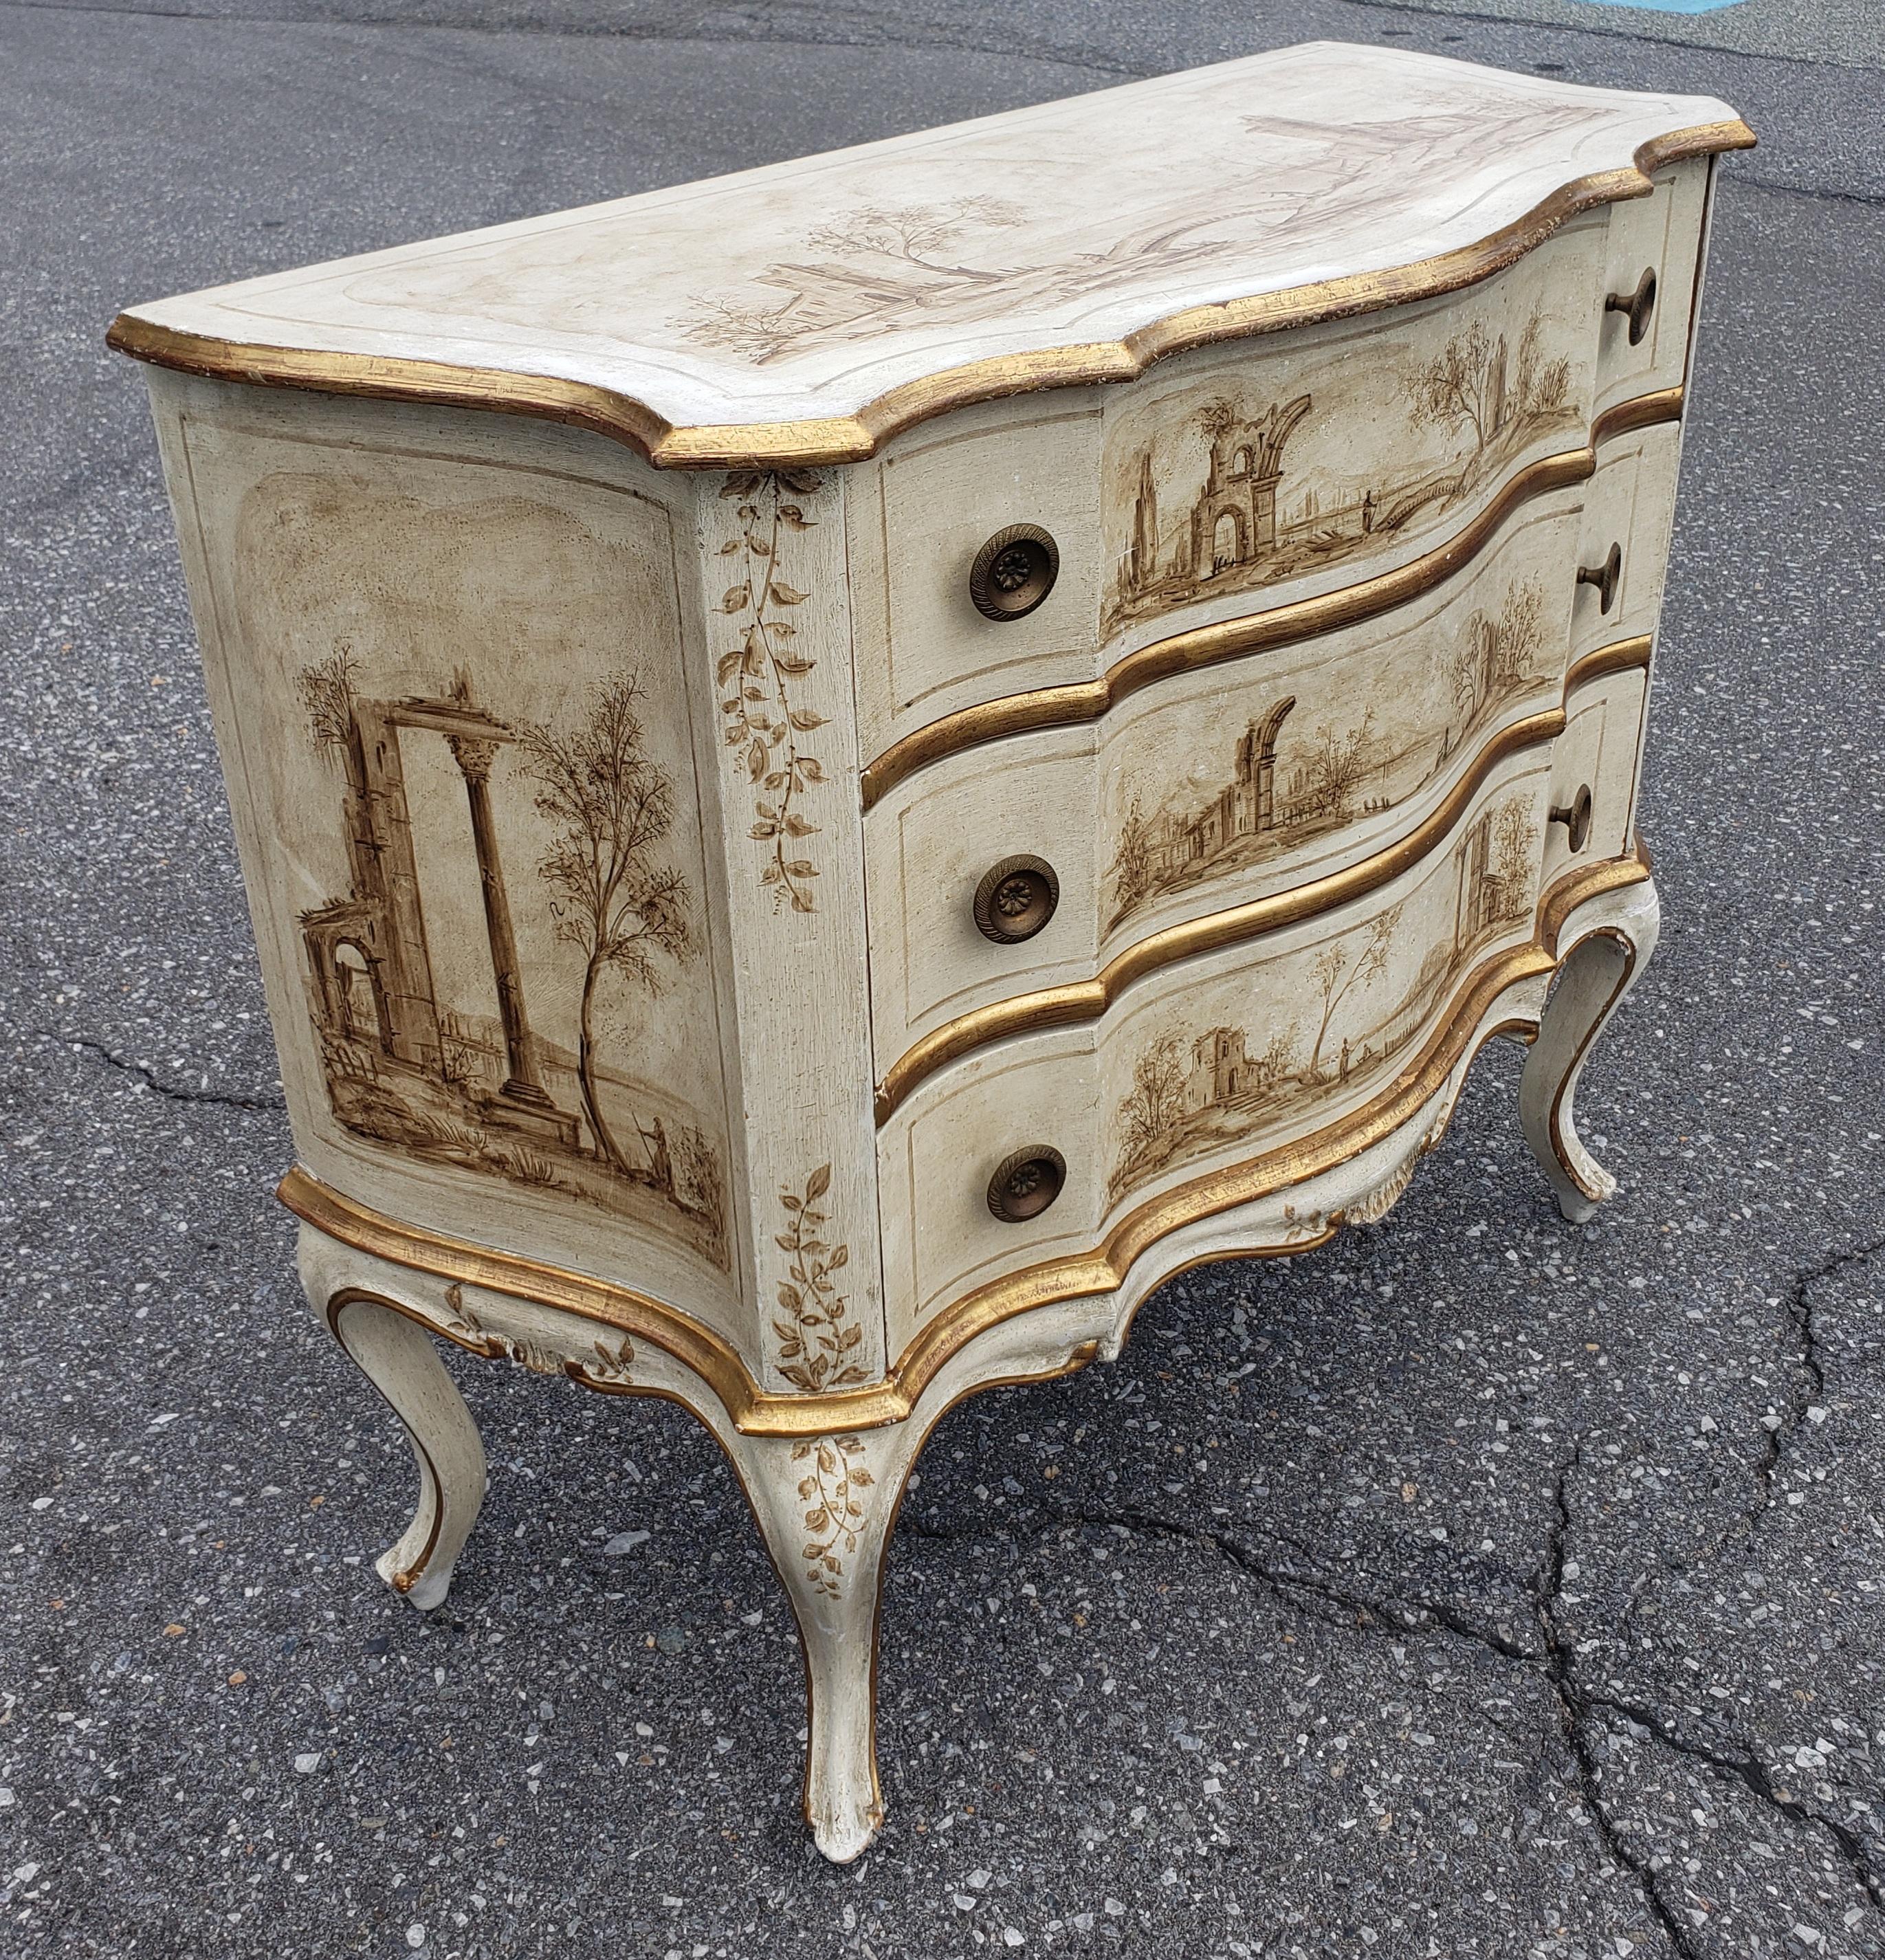 Early 20th C. Venetian Hand-Painted and Decorated Partial Gilt Commode w/ Glass For Sale 5